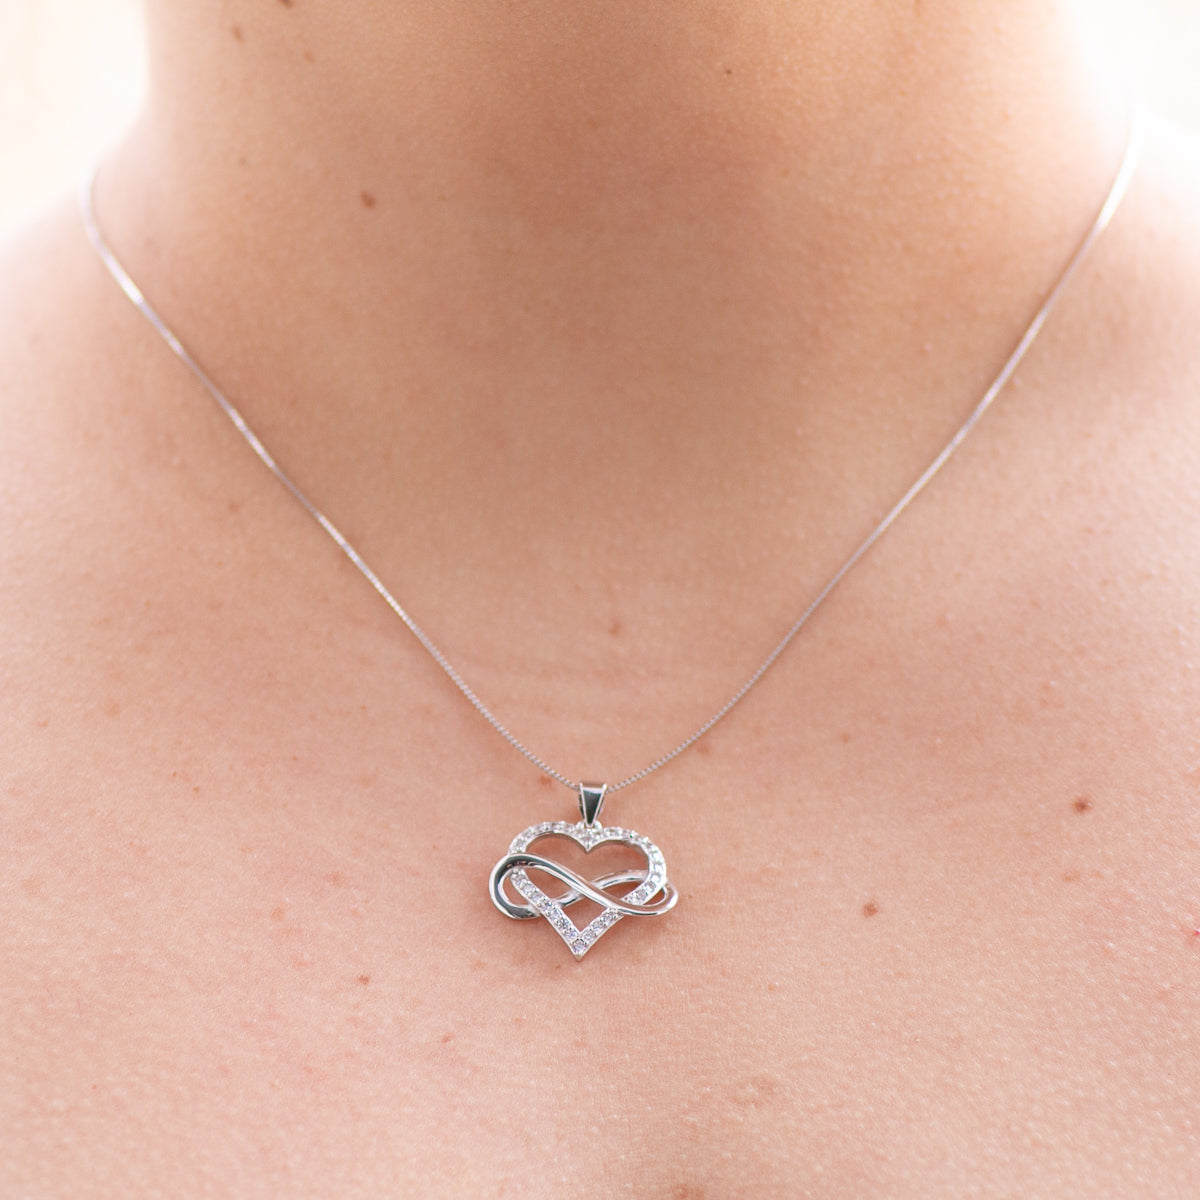 Dream Come True Infinity Heart Silver Necklace - Wife